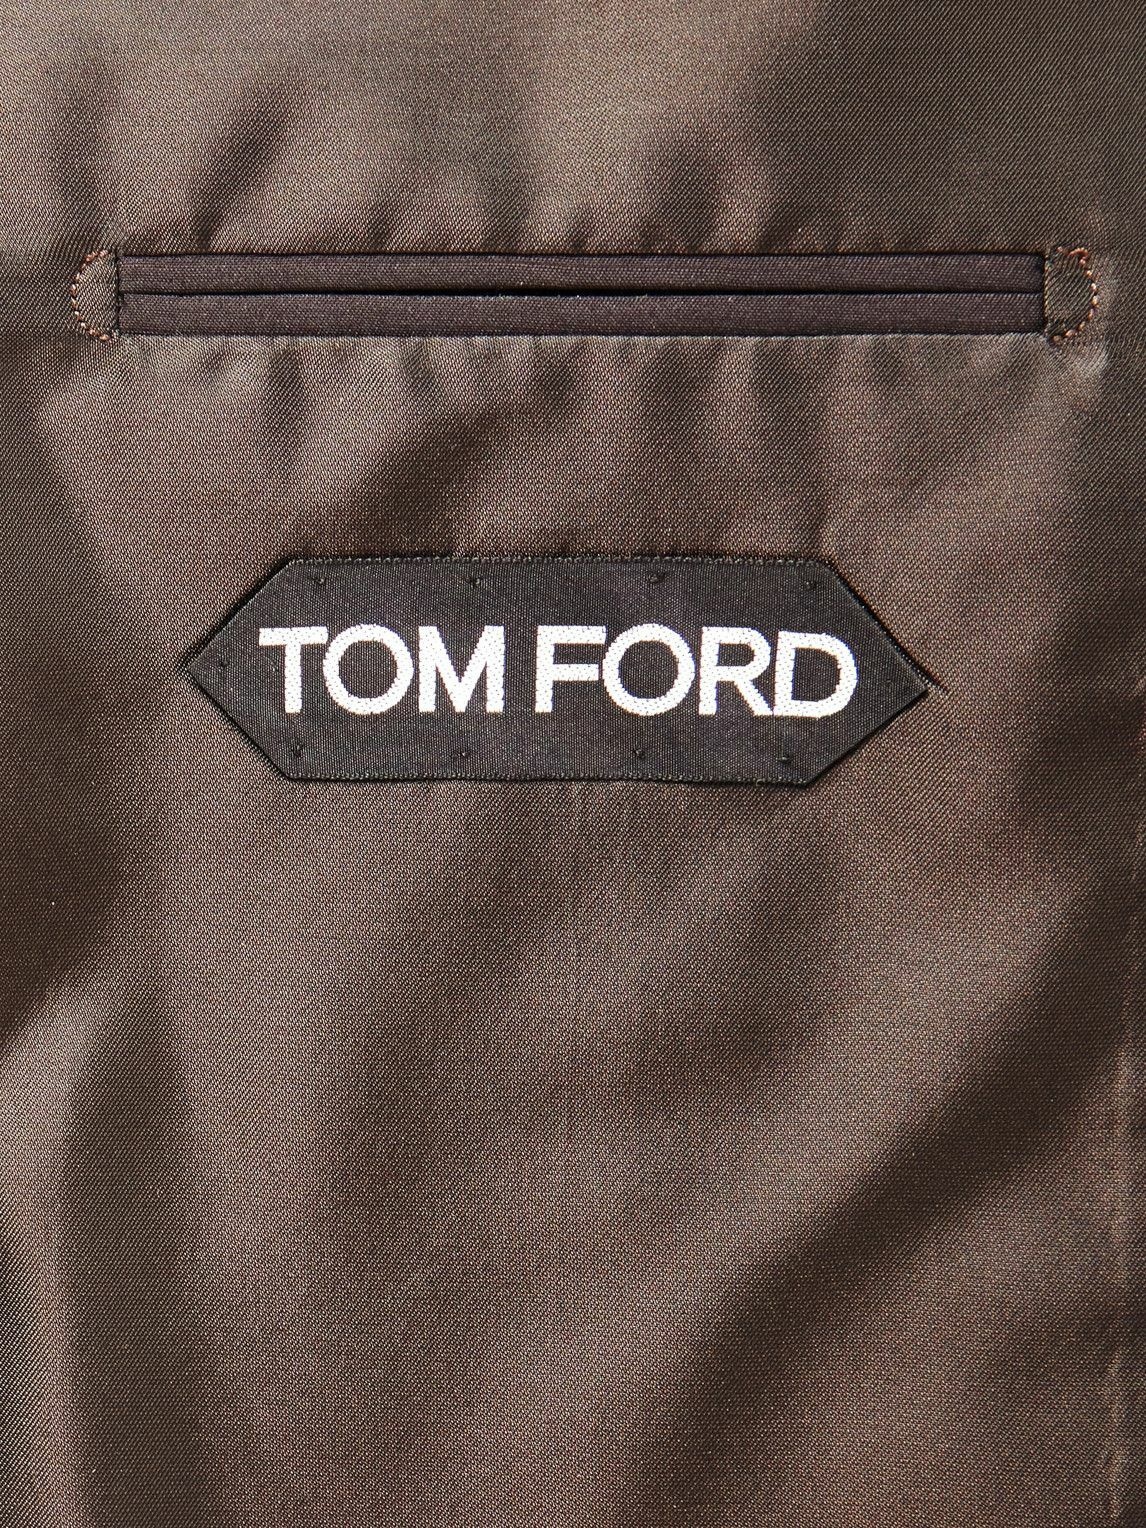 TOM FORD - Double-Breasted Wool and Silk-Blend Suit Jacket - Brown TOM FORD